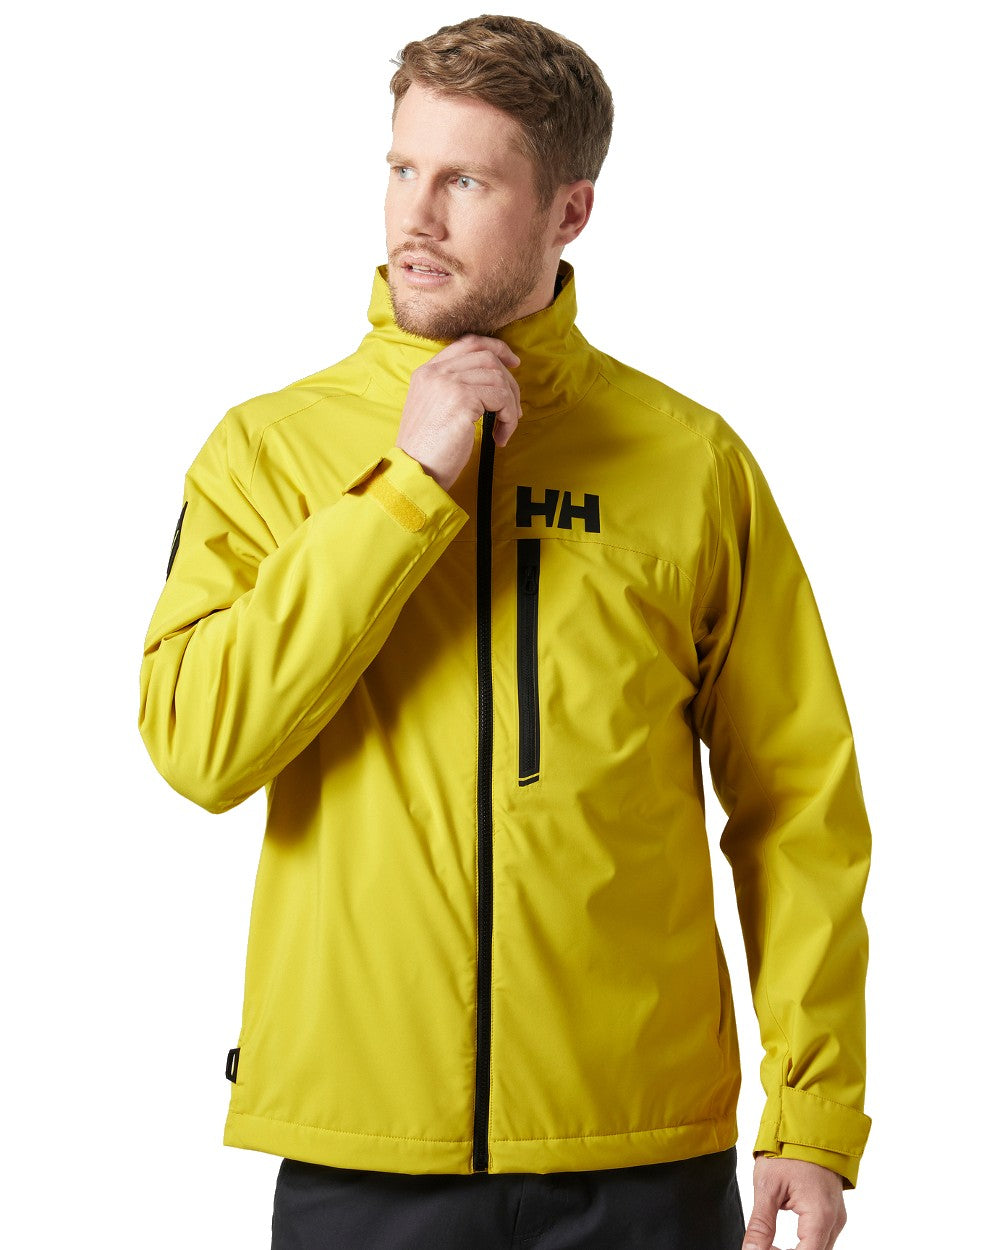 Gold Rush coloured Helly Hansen Mens HP Racing Sailing Jacket on white background 